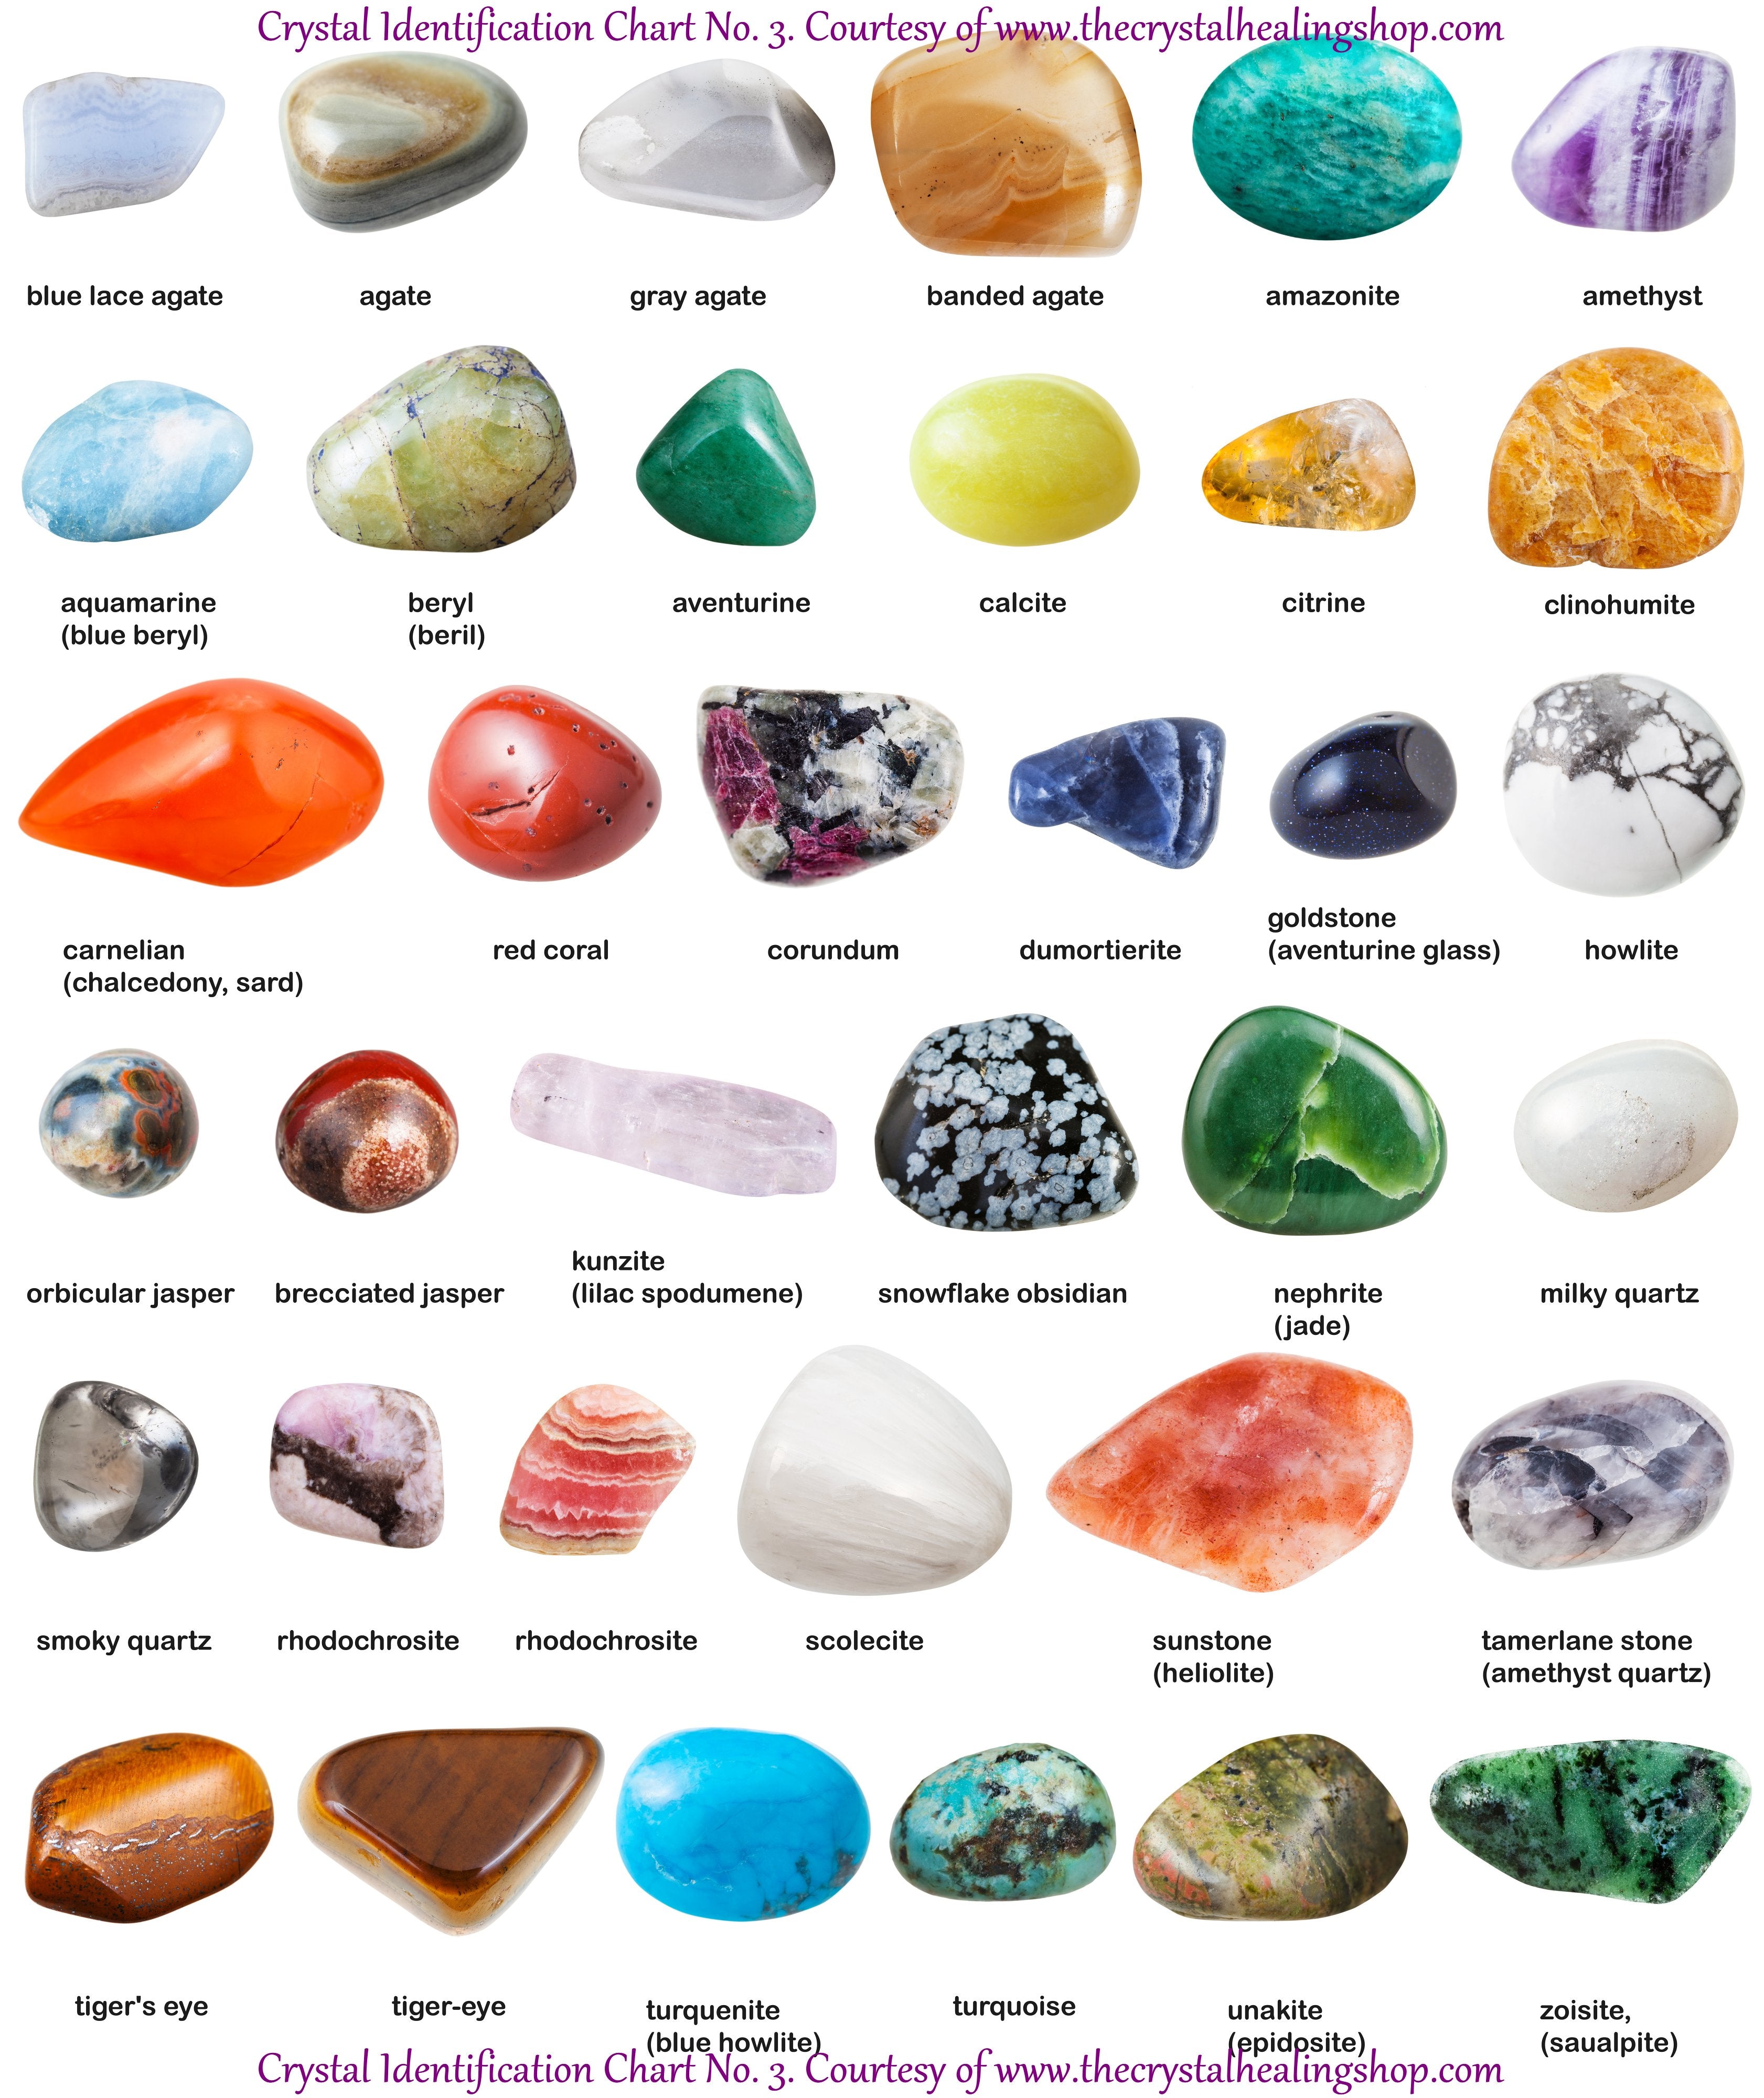 Crystal Identification Chart No. 3 The Crystal Healing Shop